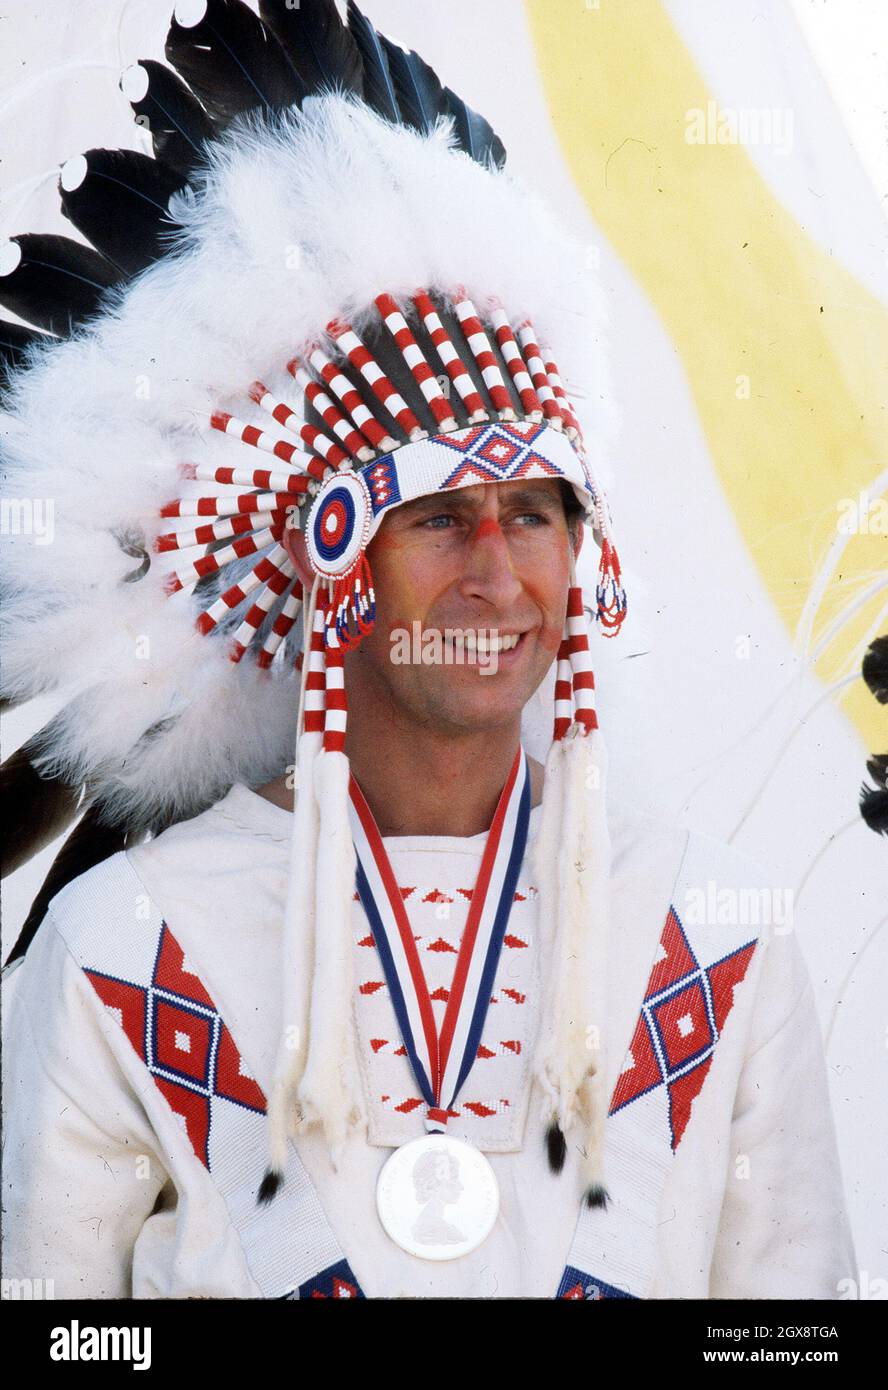 The Prince of Wales becomes Red Indian Chief Red Crow during his visit to Canada in July 1977. Anwar Hussein/allactiondigital.com  Stock Photo